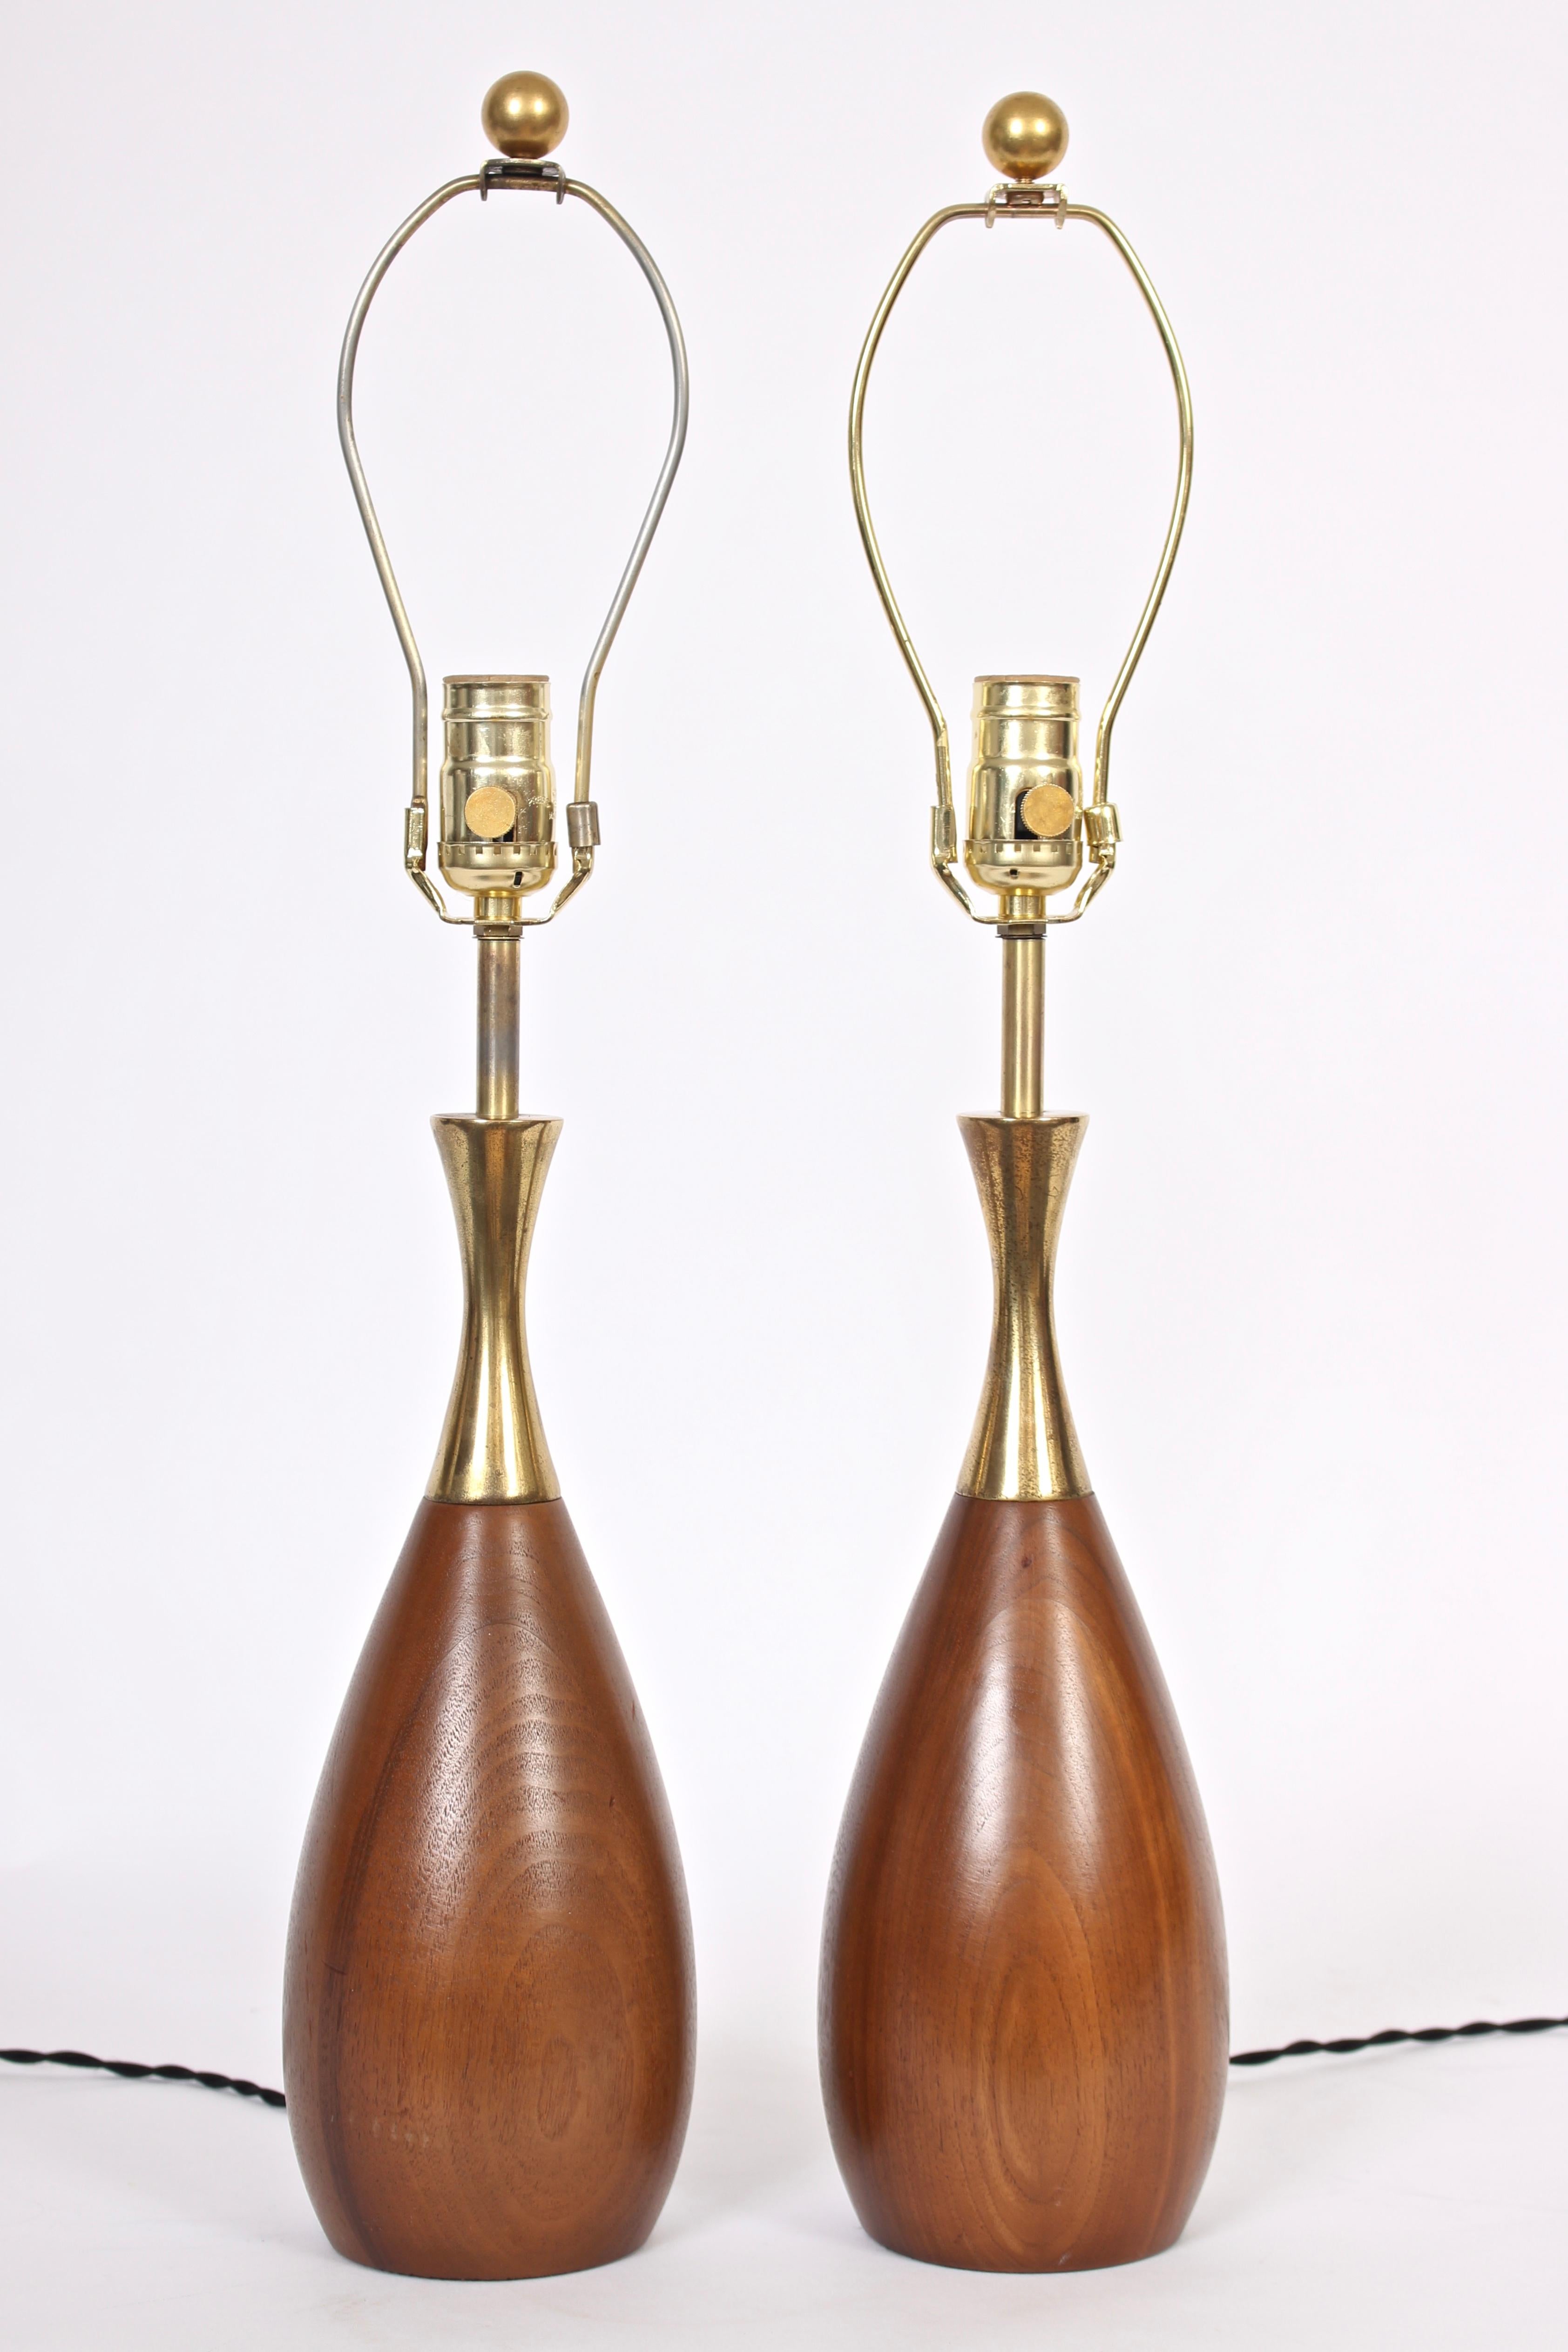 American Mid-Century Modern pair of Tony Paul for Westwood Industries solid walnut and brass table lamps. Featuring a smooth beautifully grained bowling pin form in solid walnut accented with reflective and flared brass upper. 18 H to top of socket.